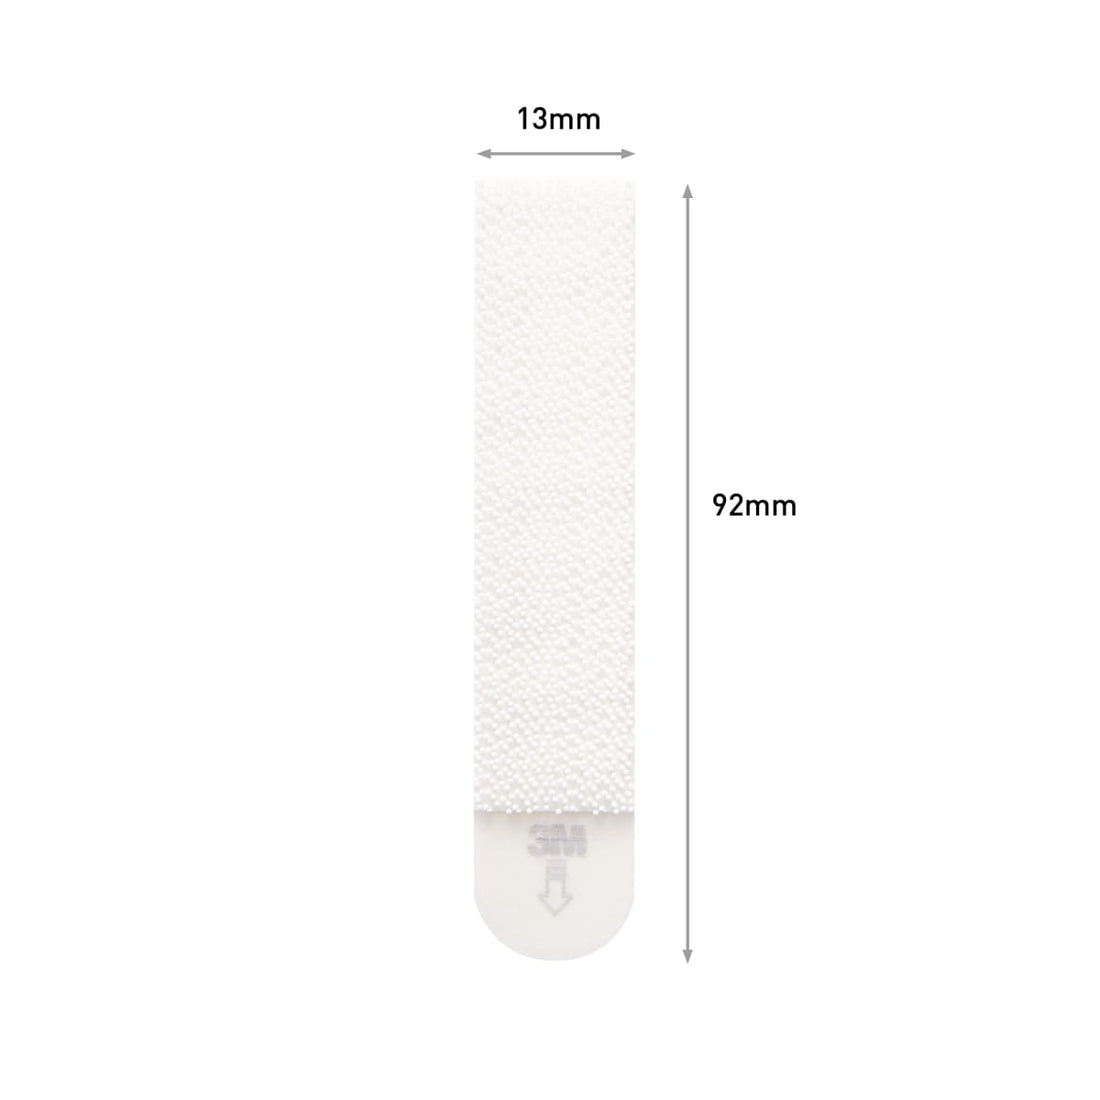 COMMAND COMMAND LARGE HANGING STRIPS 7.2KG - best price from Maltashopper.com BR410007392